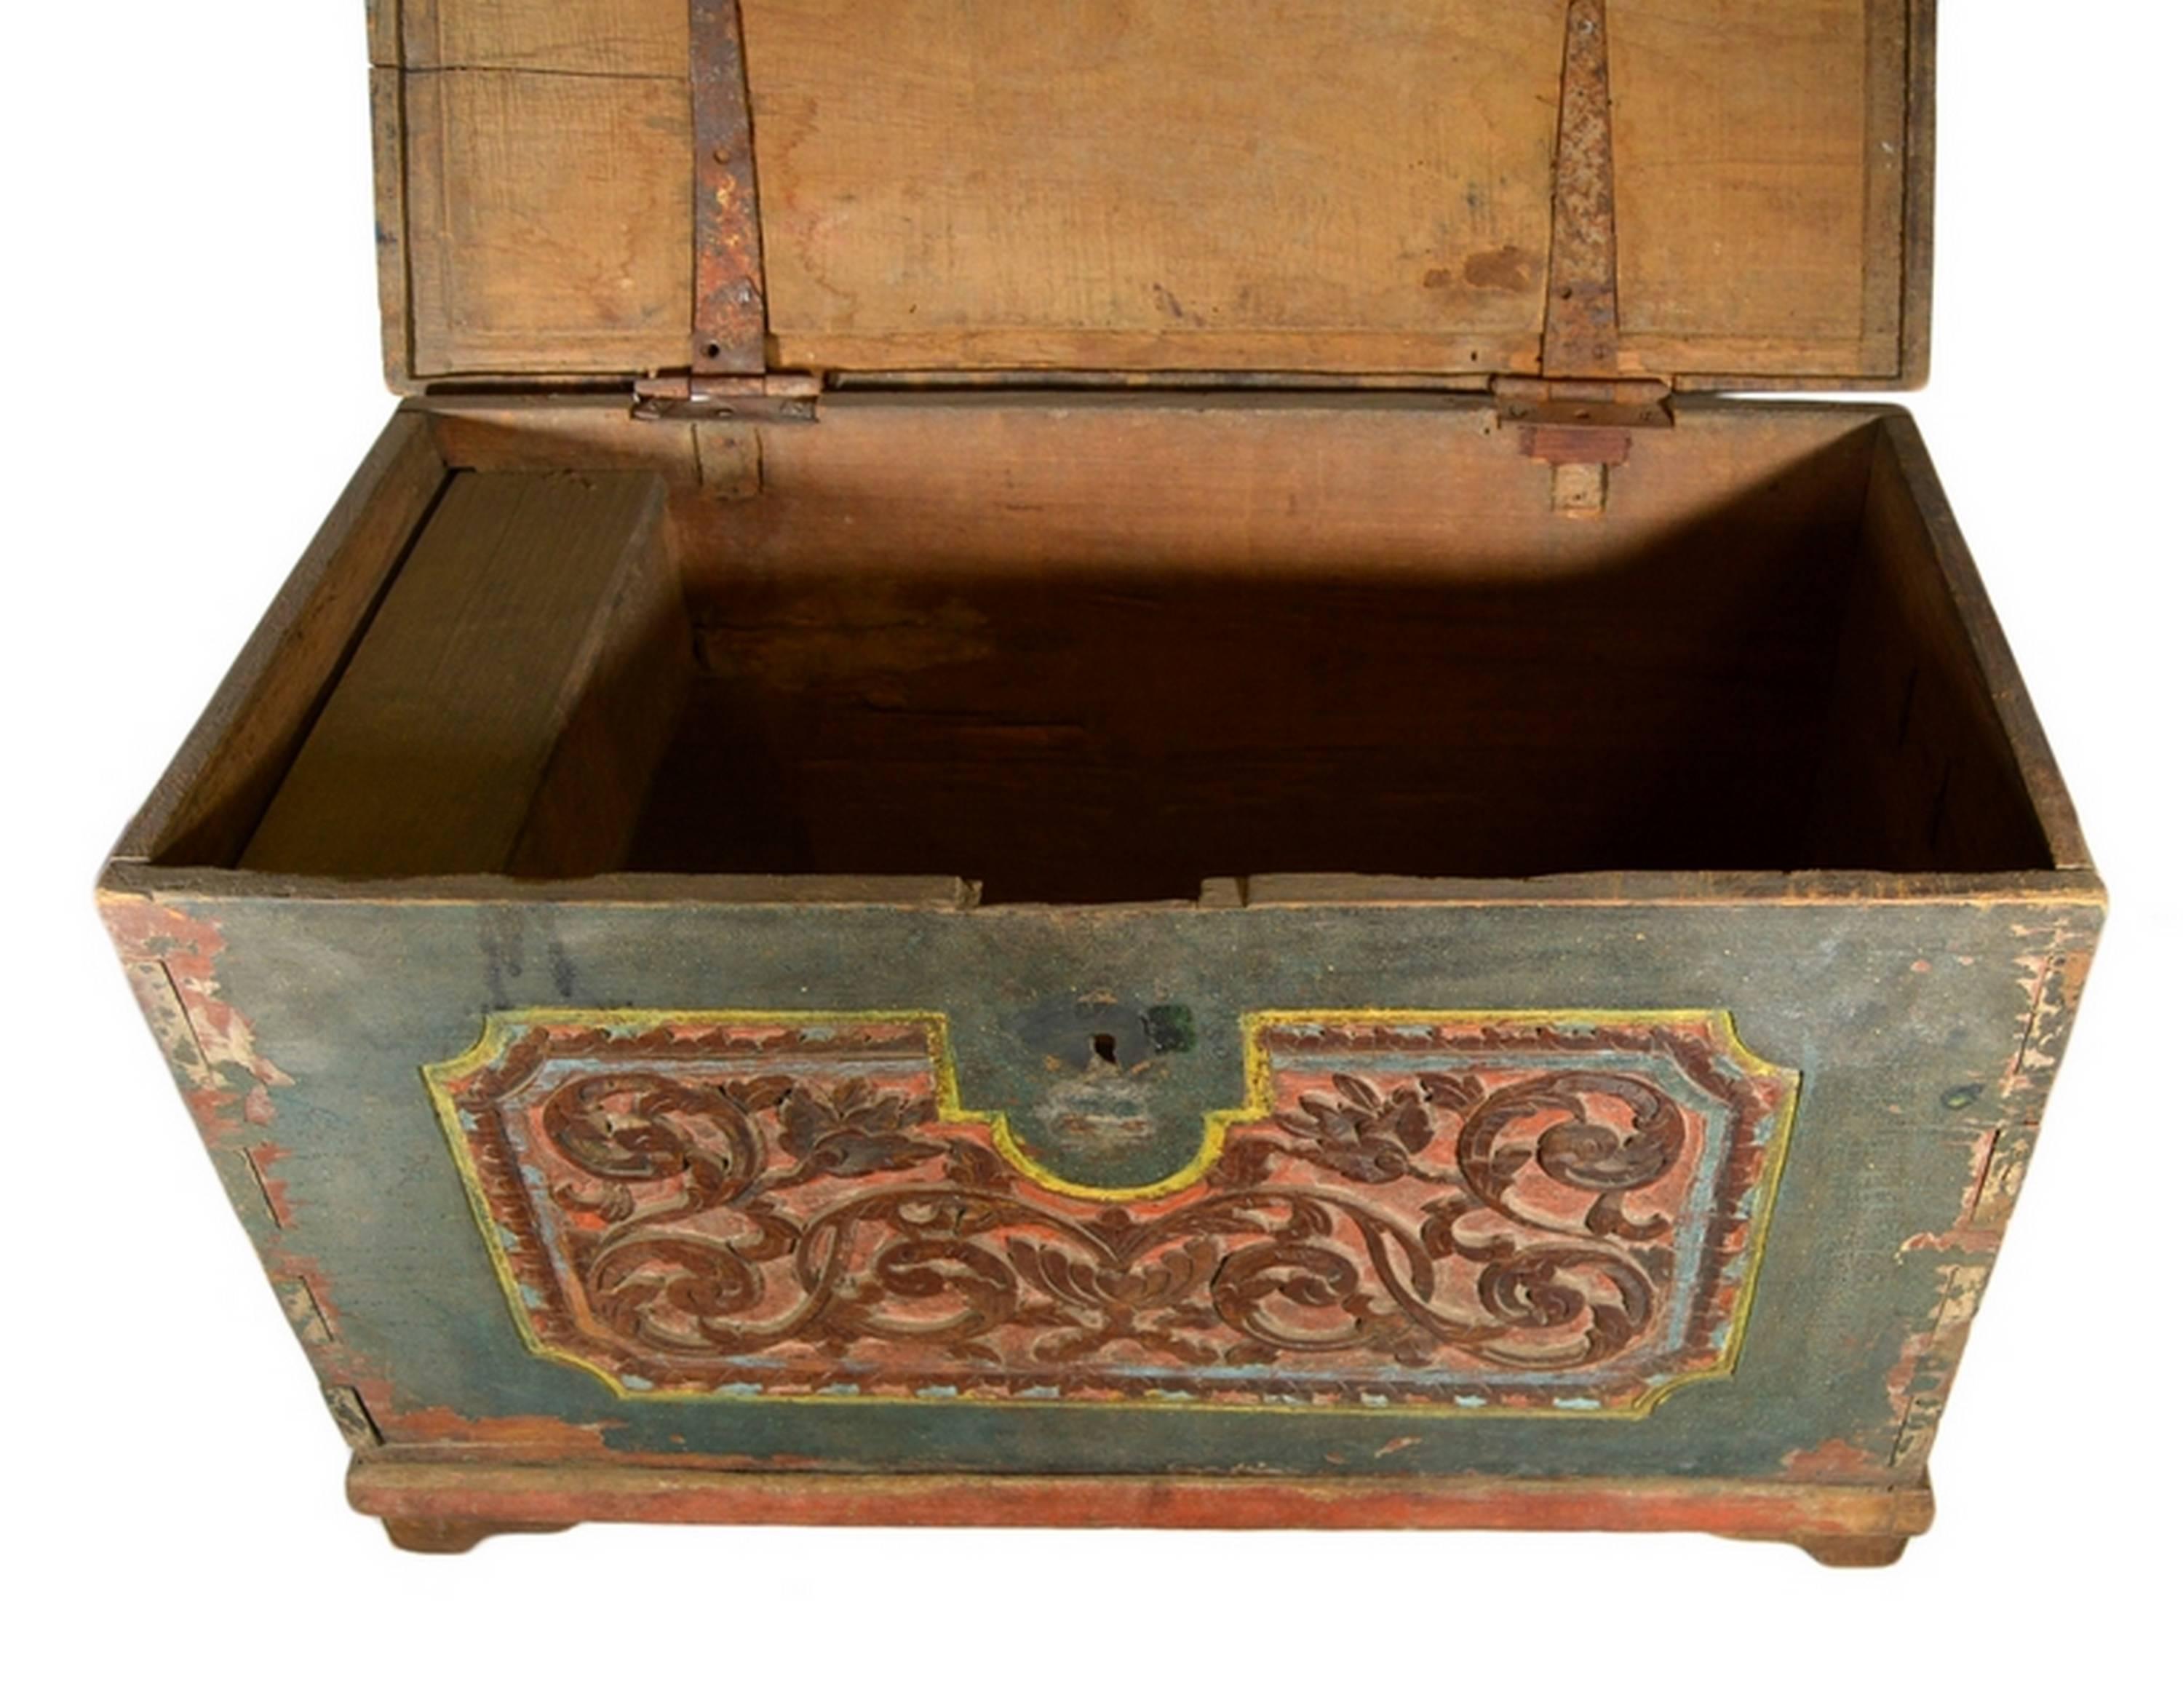 Wood Antique Indonesian Hand-Carved and Painted Trunk with Foliage’s, 19th Century